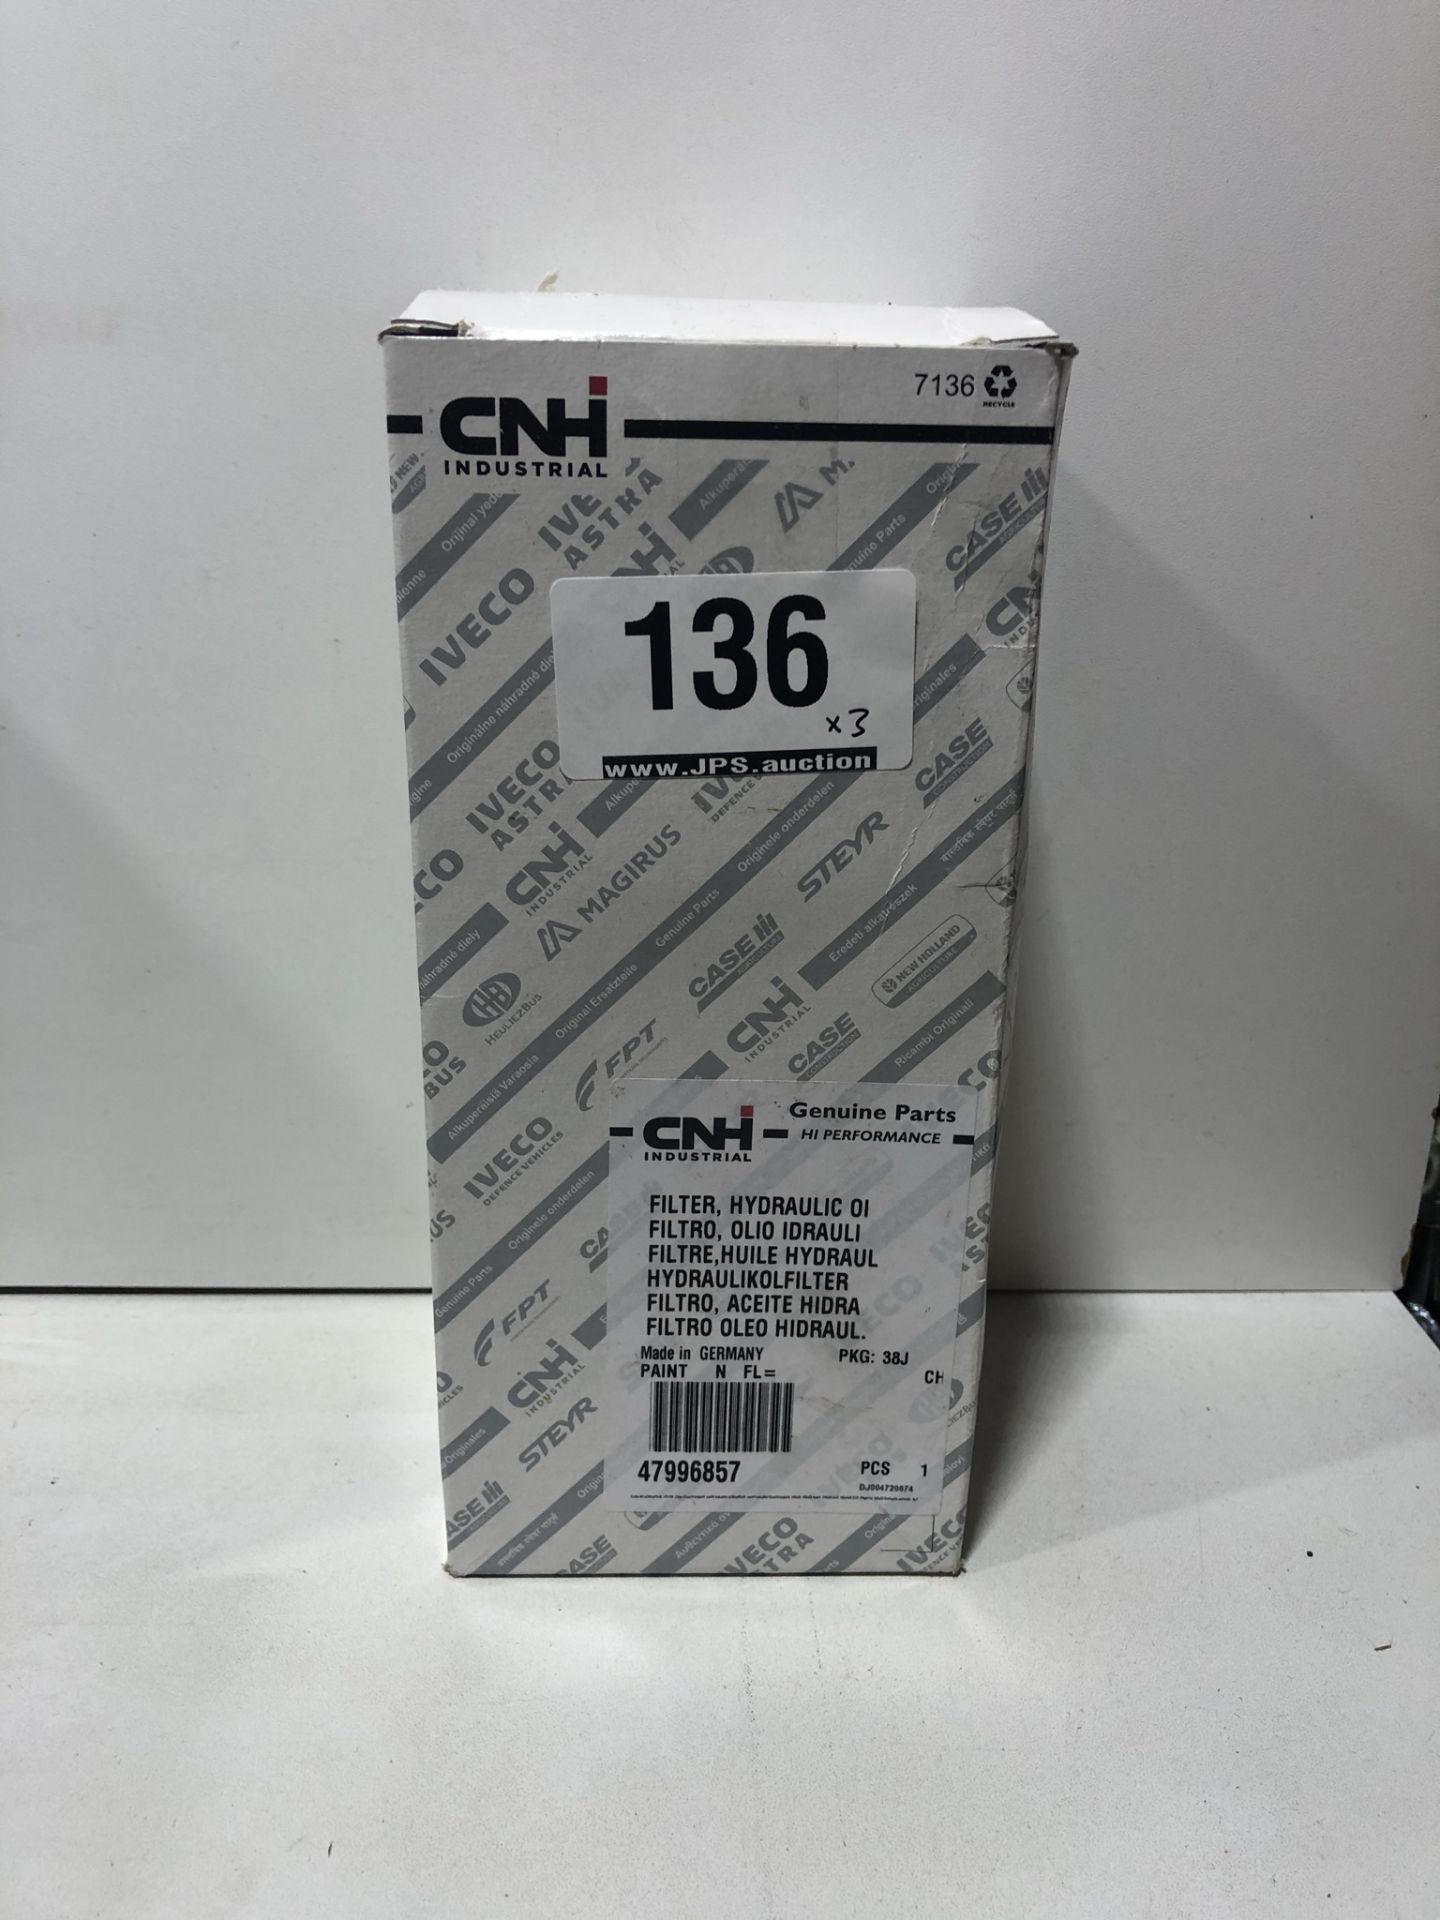 3 x CNH Hydraulic Oil Filters - Image 2 of 3